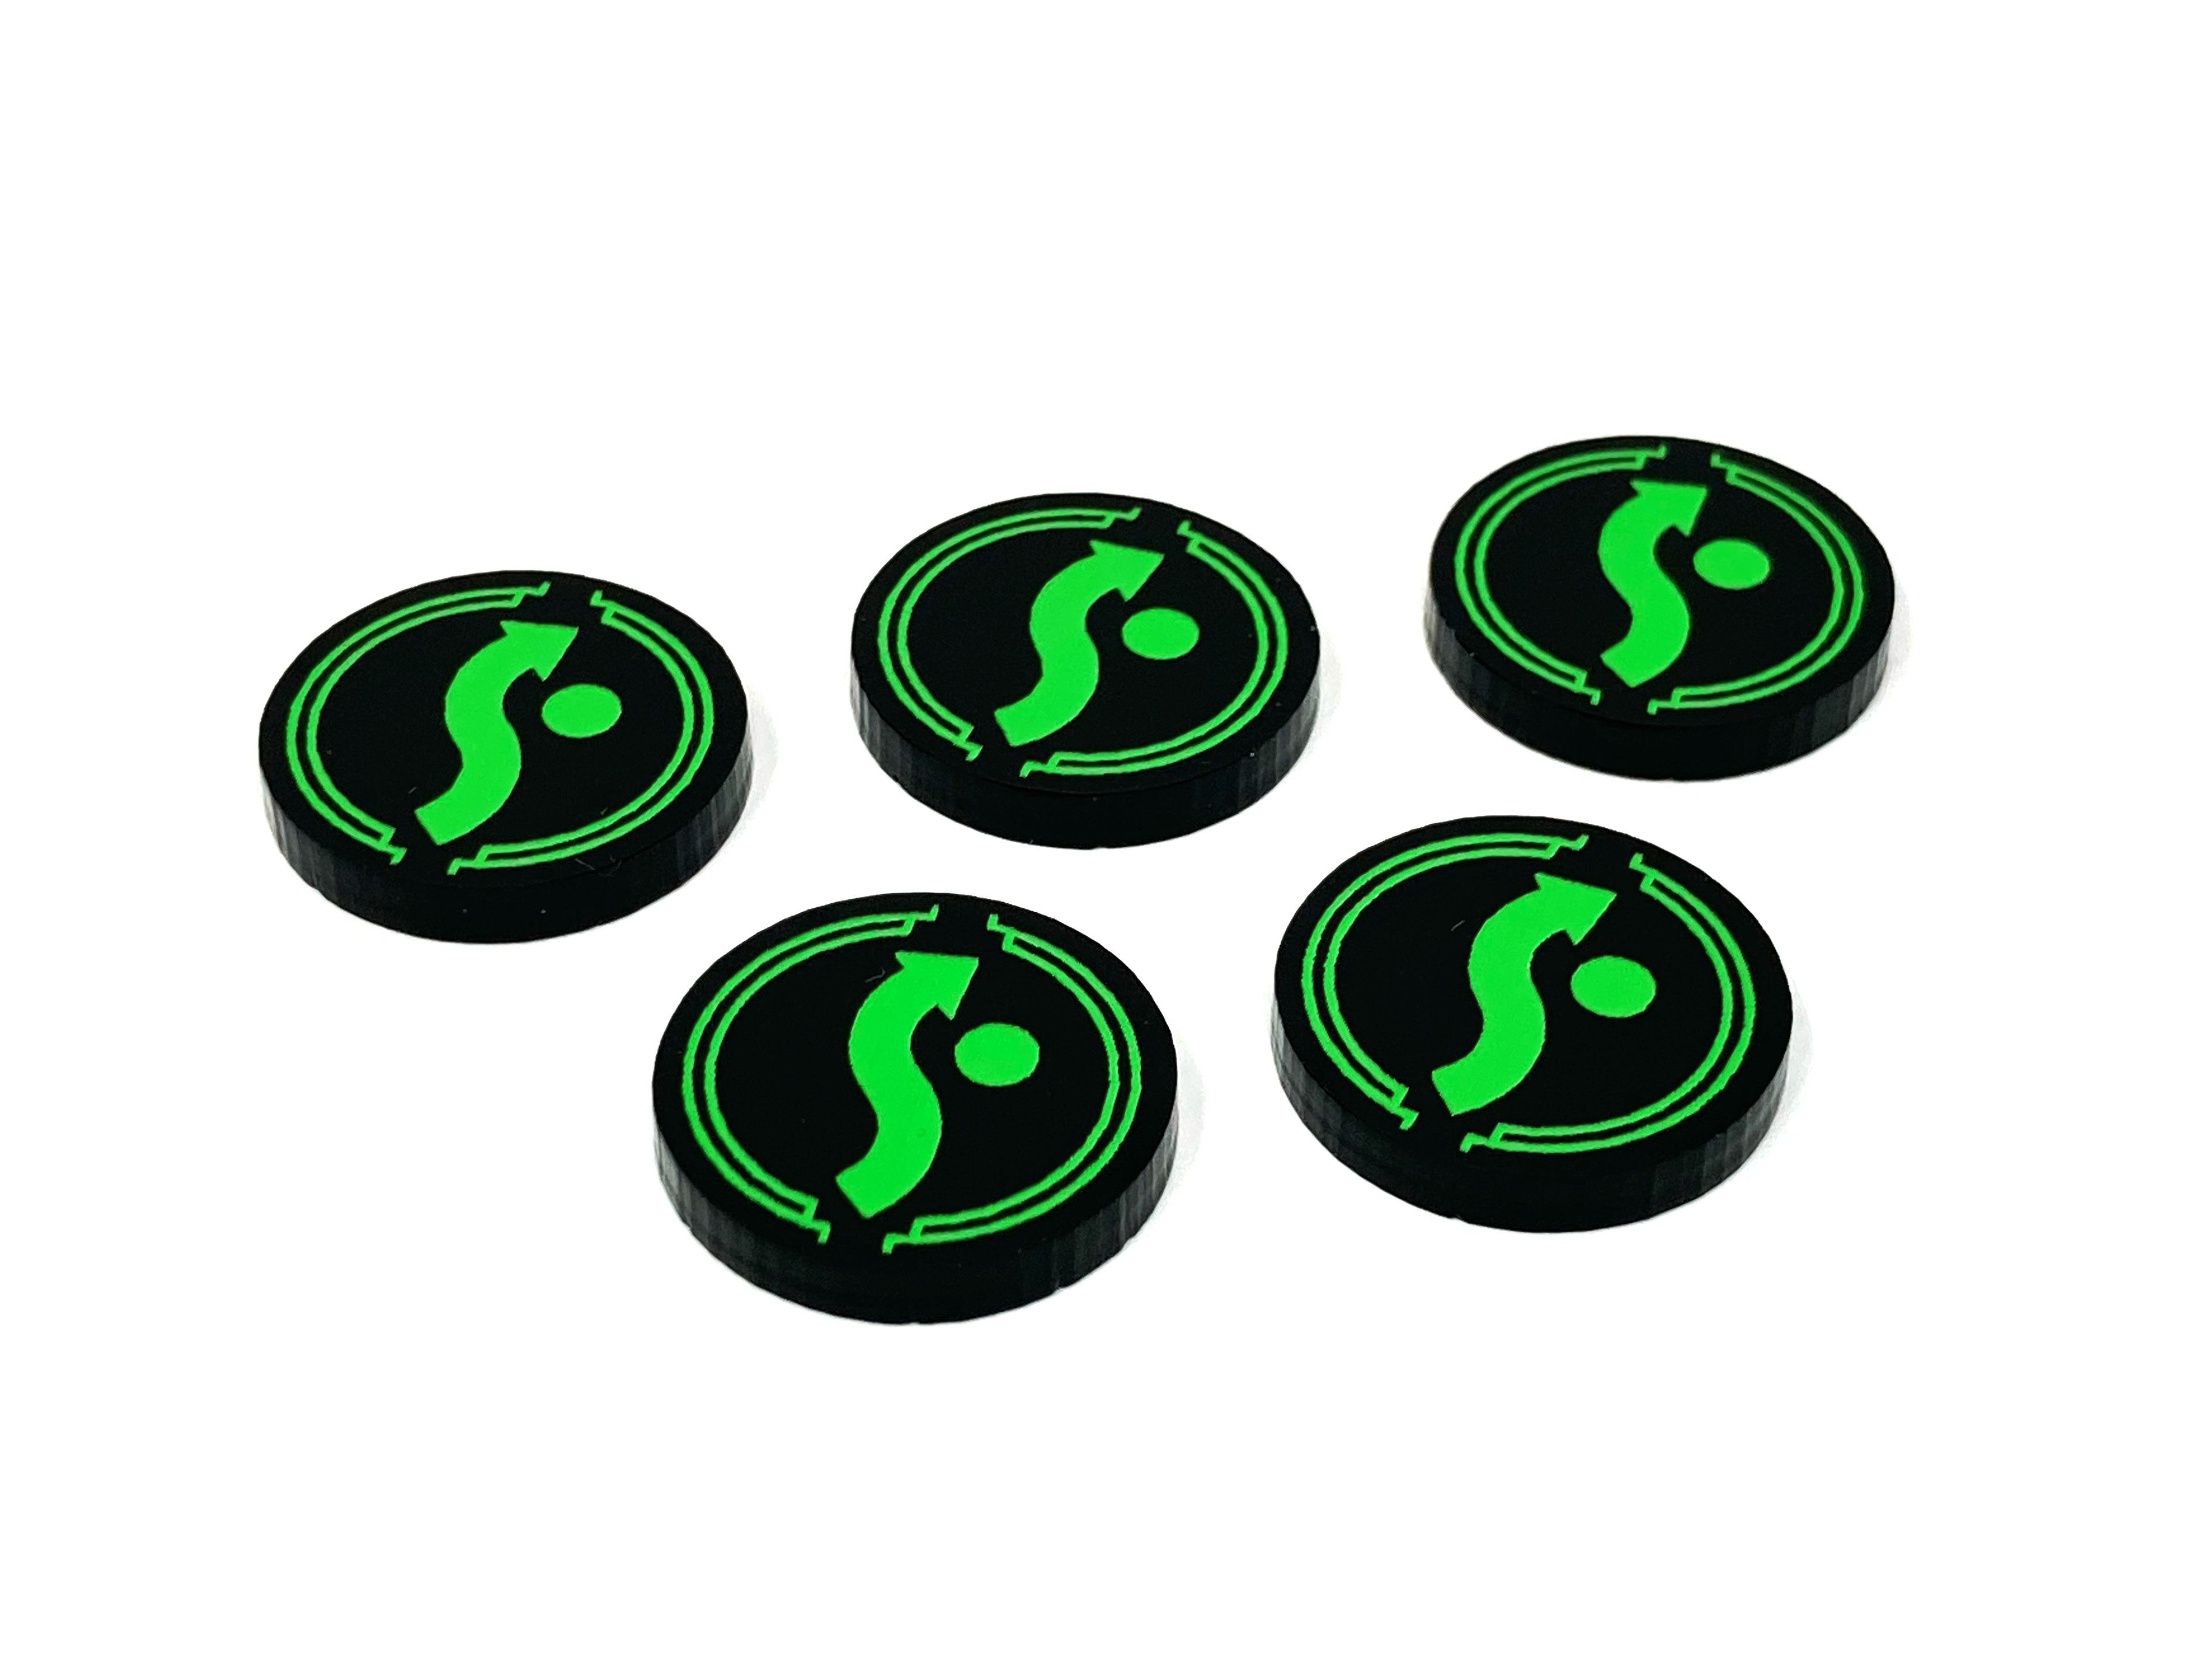 5 x Evade Tokens - Black Series (Single Sided)